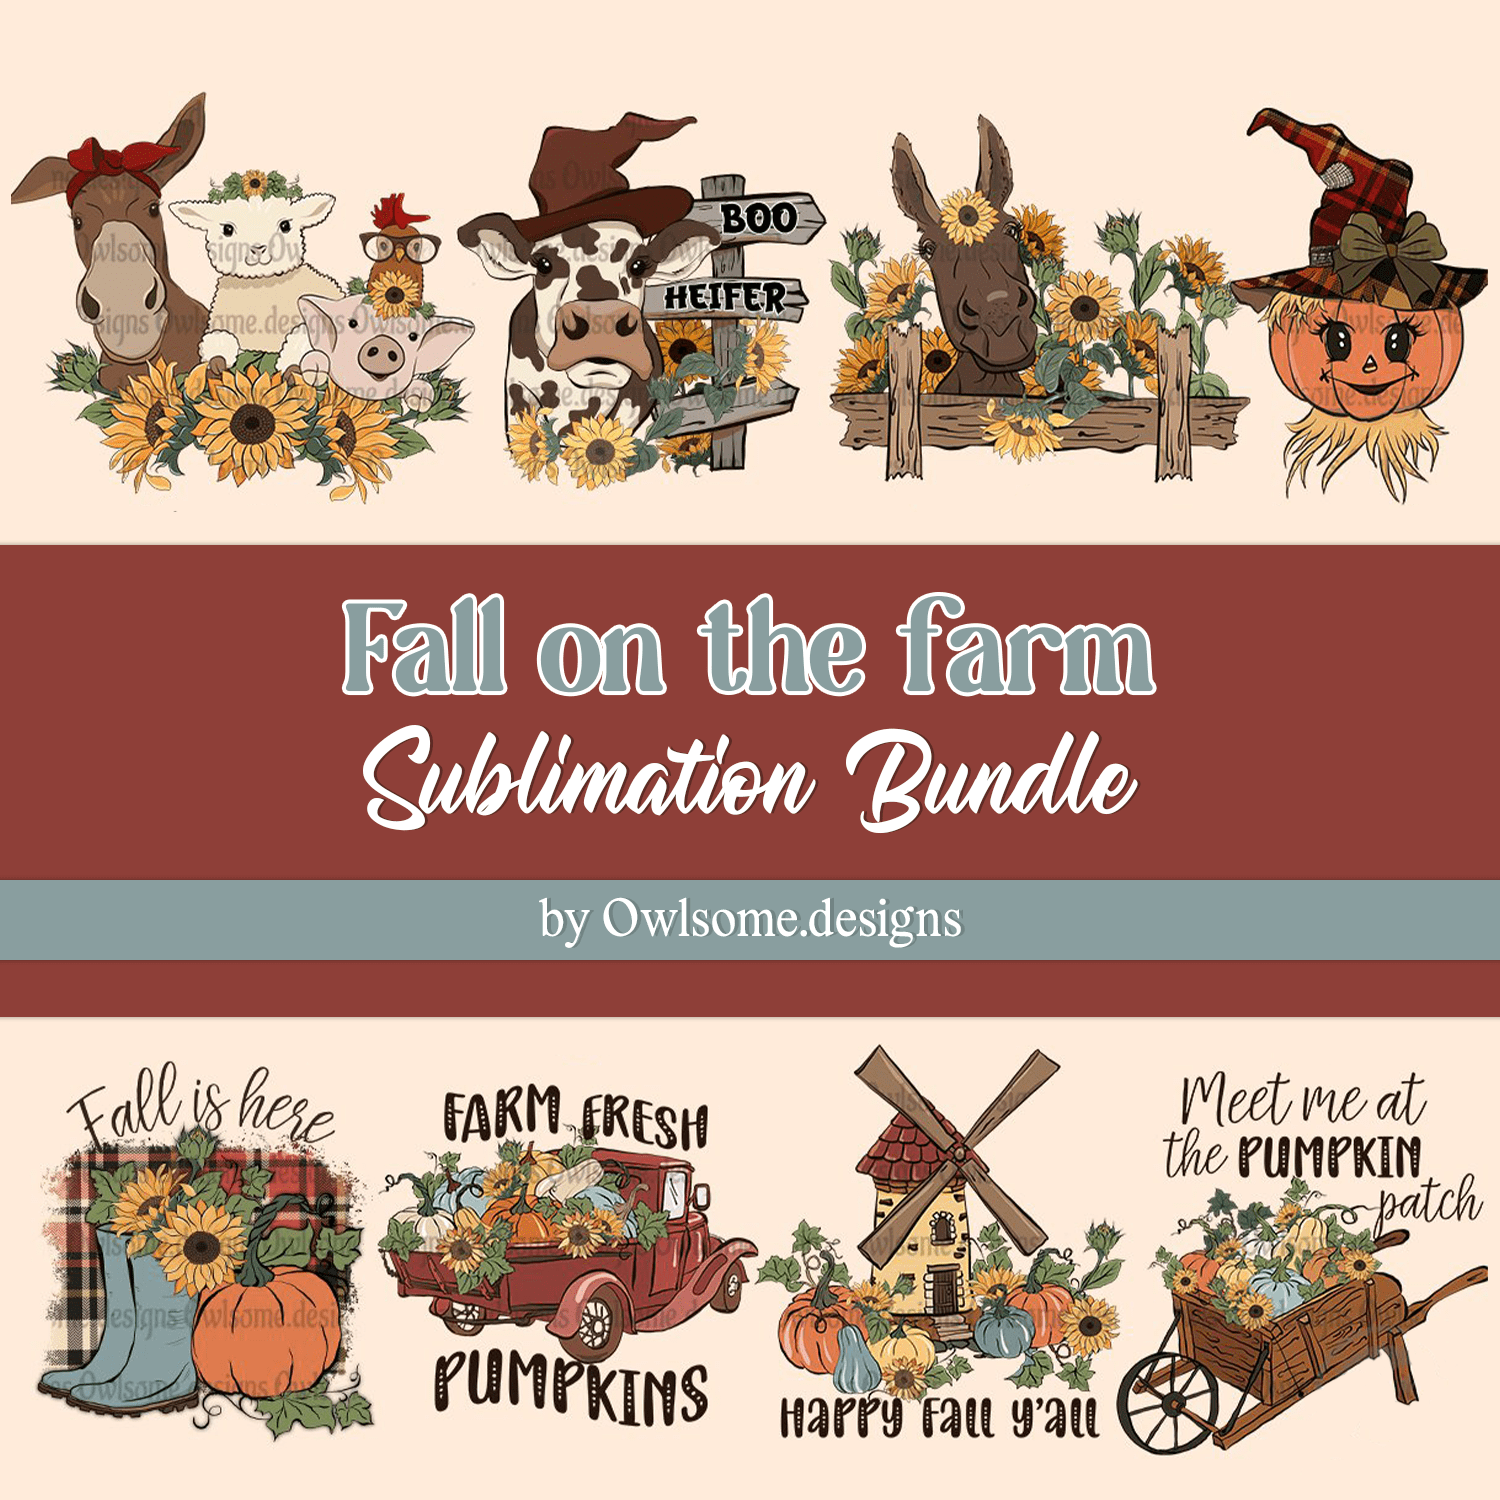 Fall on the farm Sublimation Bundle cover.